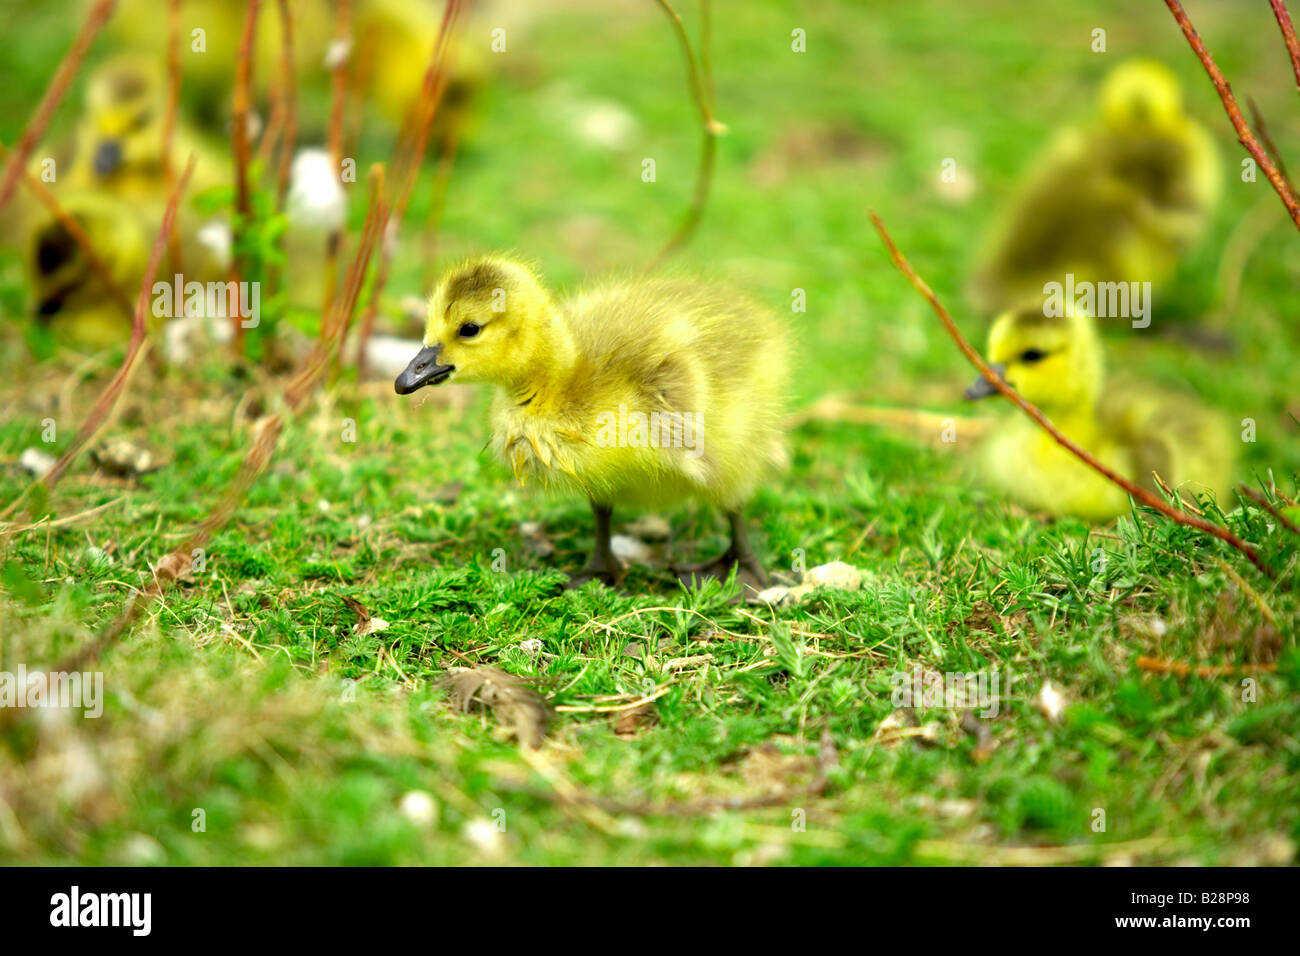 A baby goose (gosling) goes for a walk with its siblings in the background Stock Photo